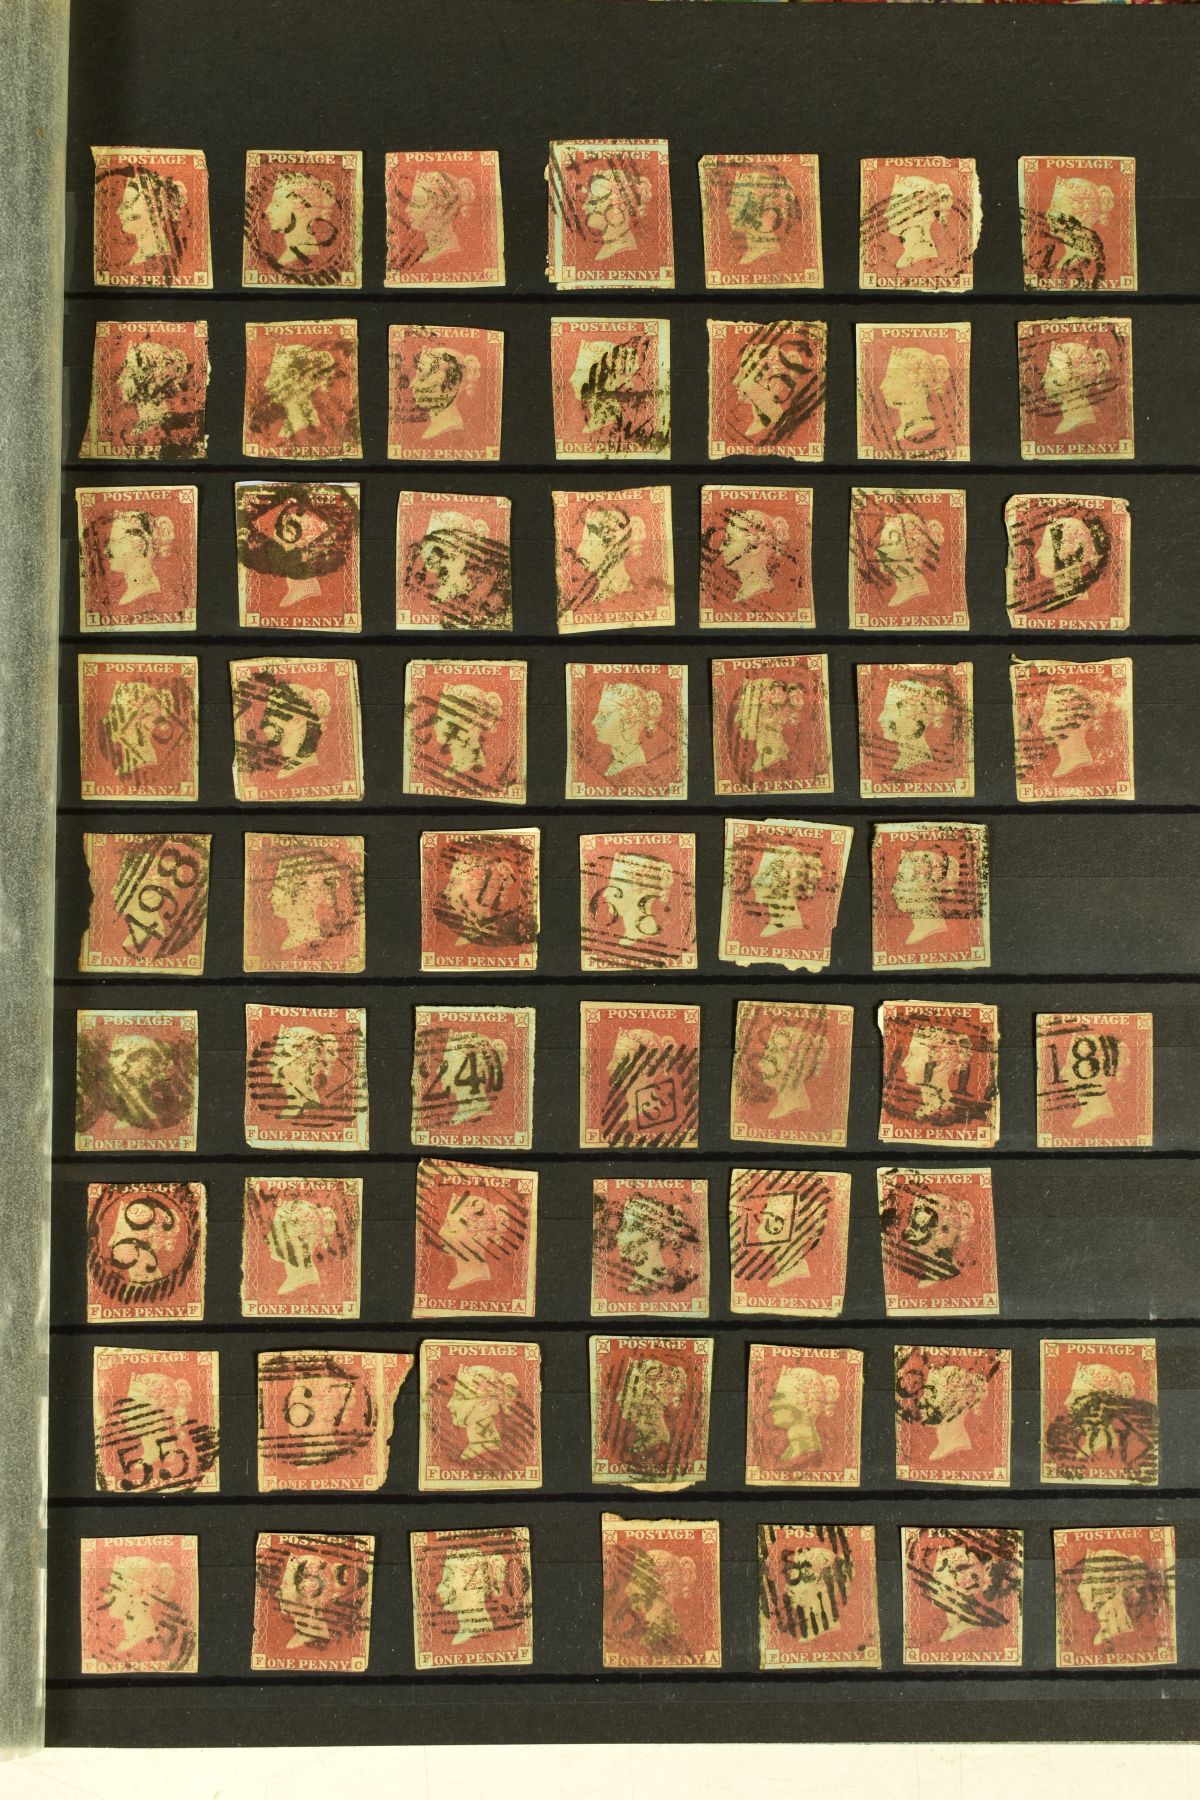 A LARGE BOX OF STAMPS in 19 albums includes GB QV to QEII collections, Commonwealth fiscals/ - Image 15 of 17